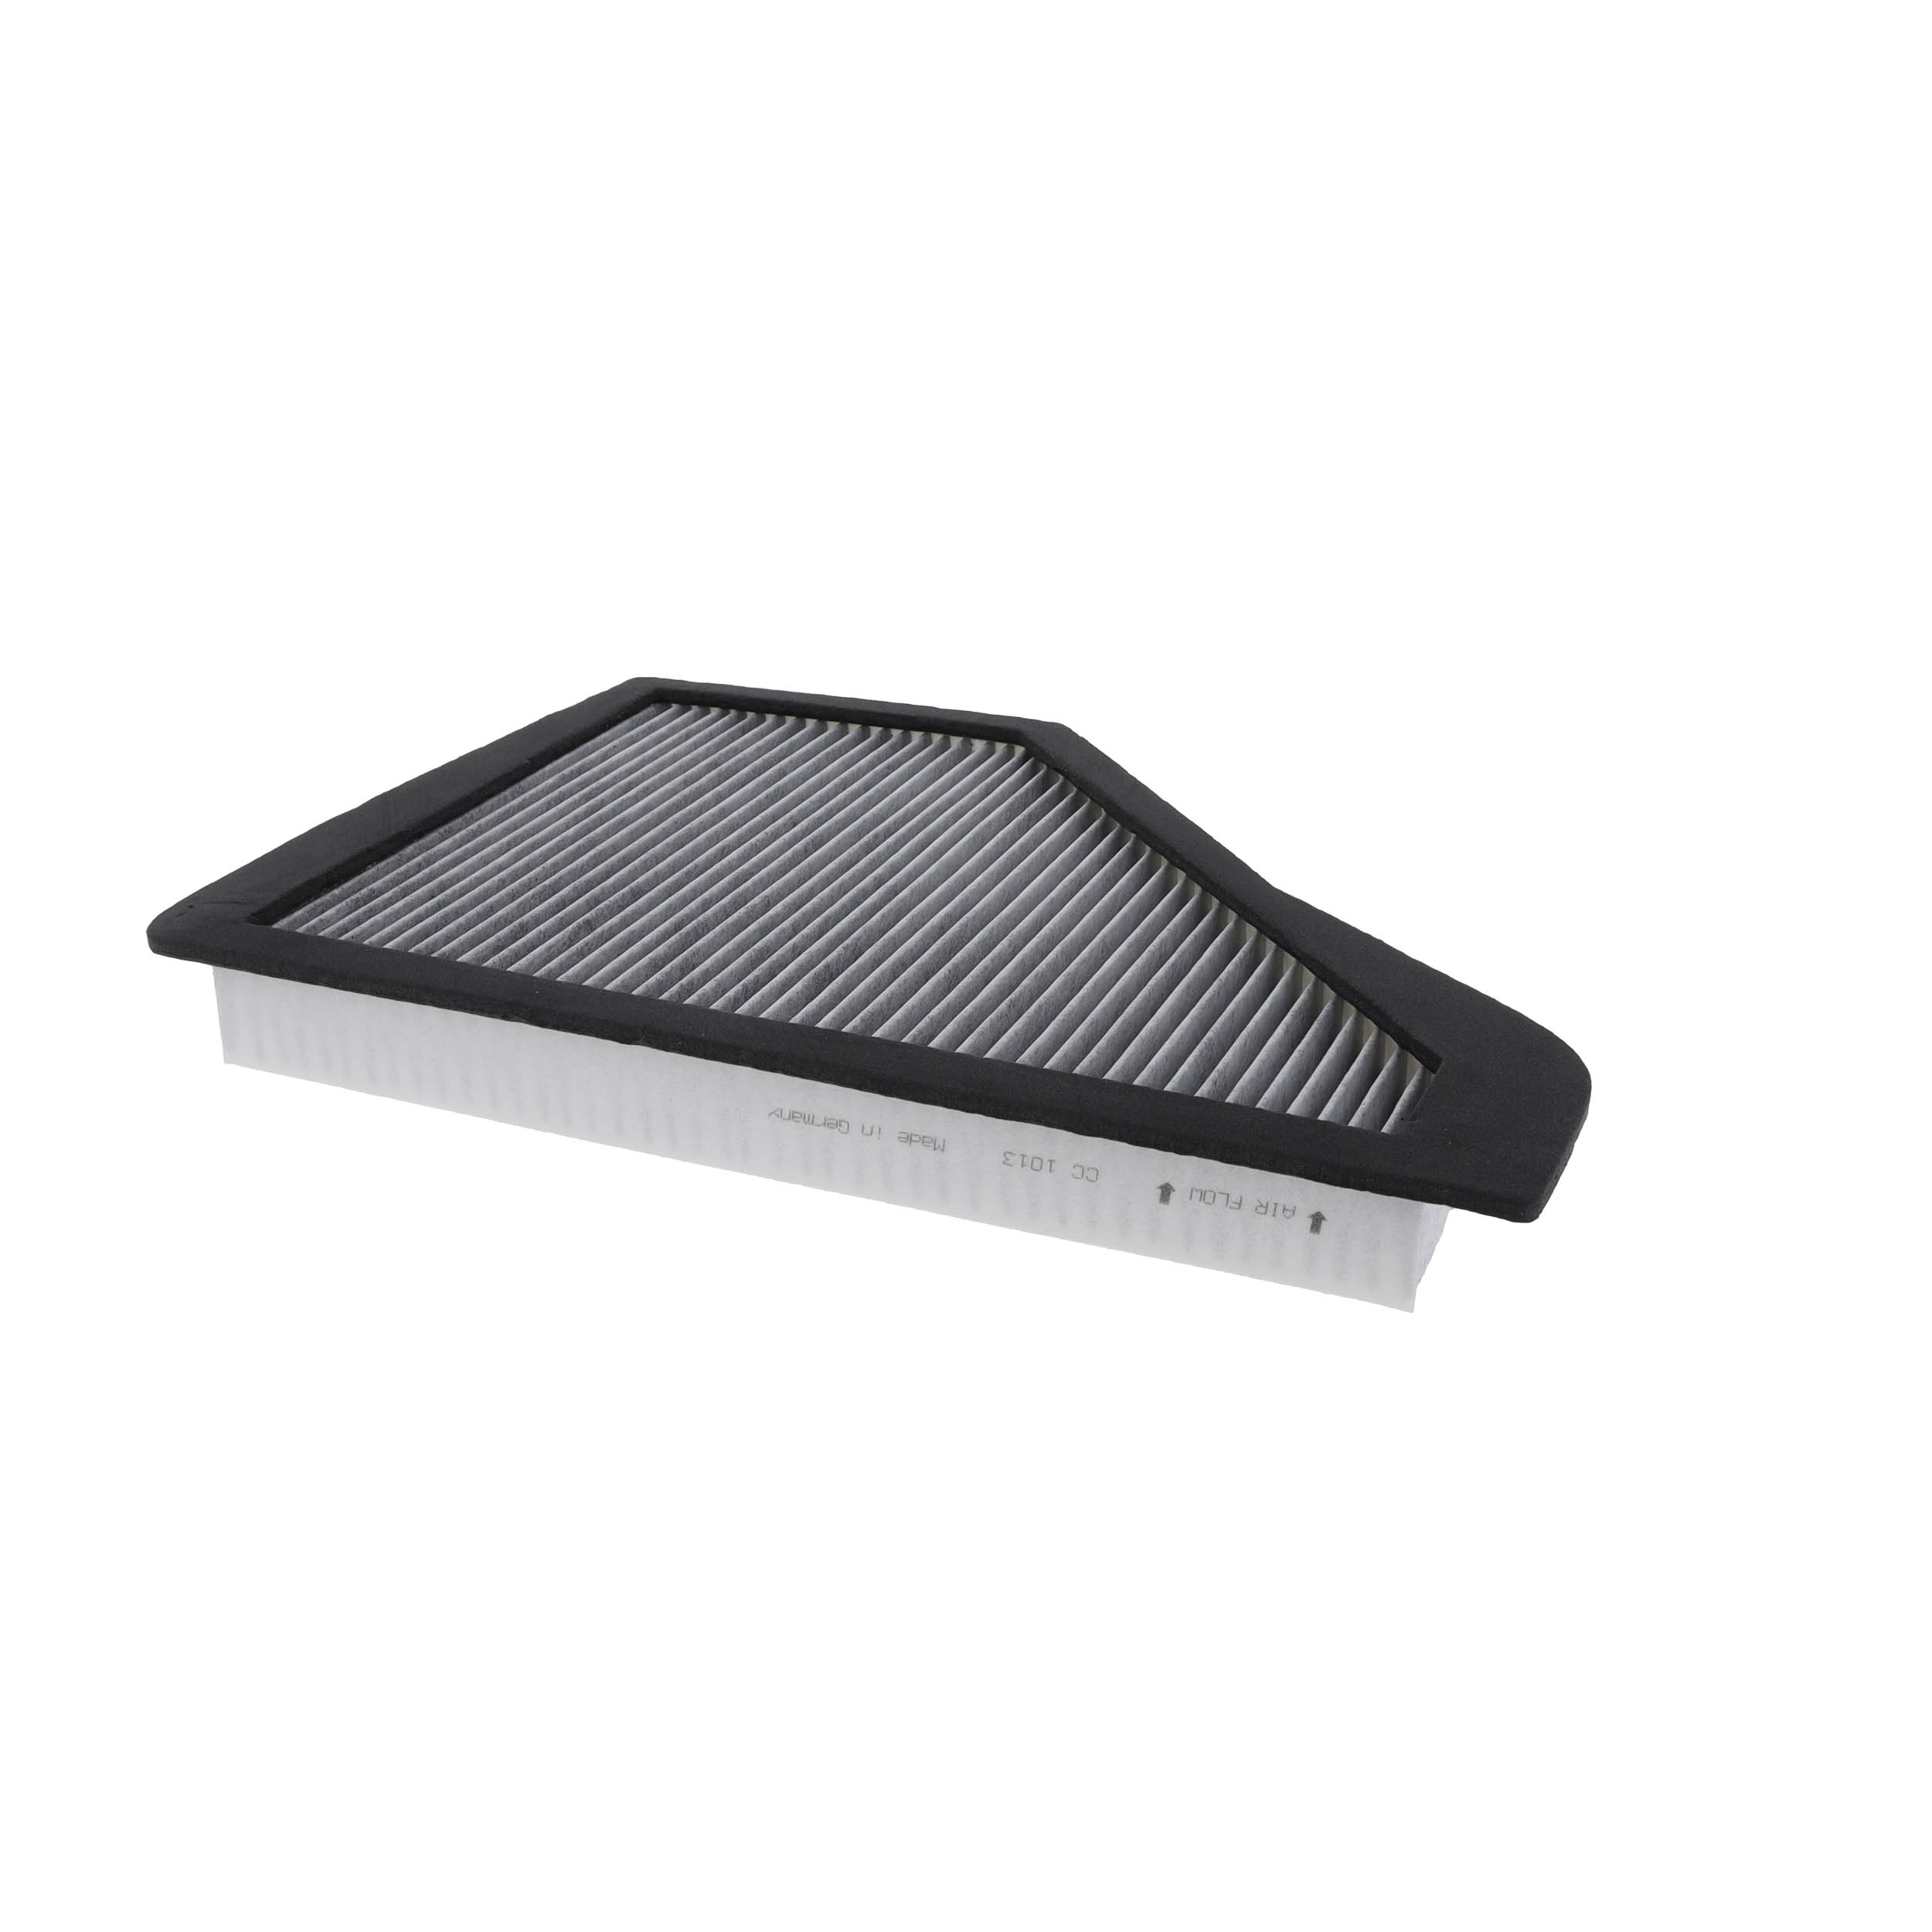 CORTECO Activated Carbon Filter, 391 mm x 257 mm x 43 mm Width: 257mm, Height: 43mm, Length: 391mm Cabin filter 21653010 buy